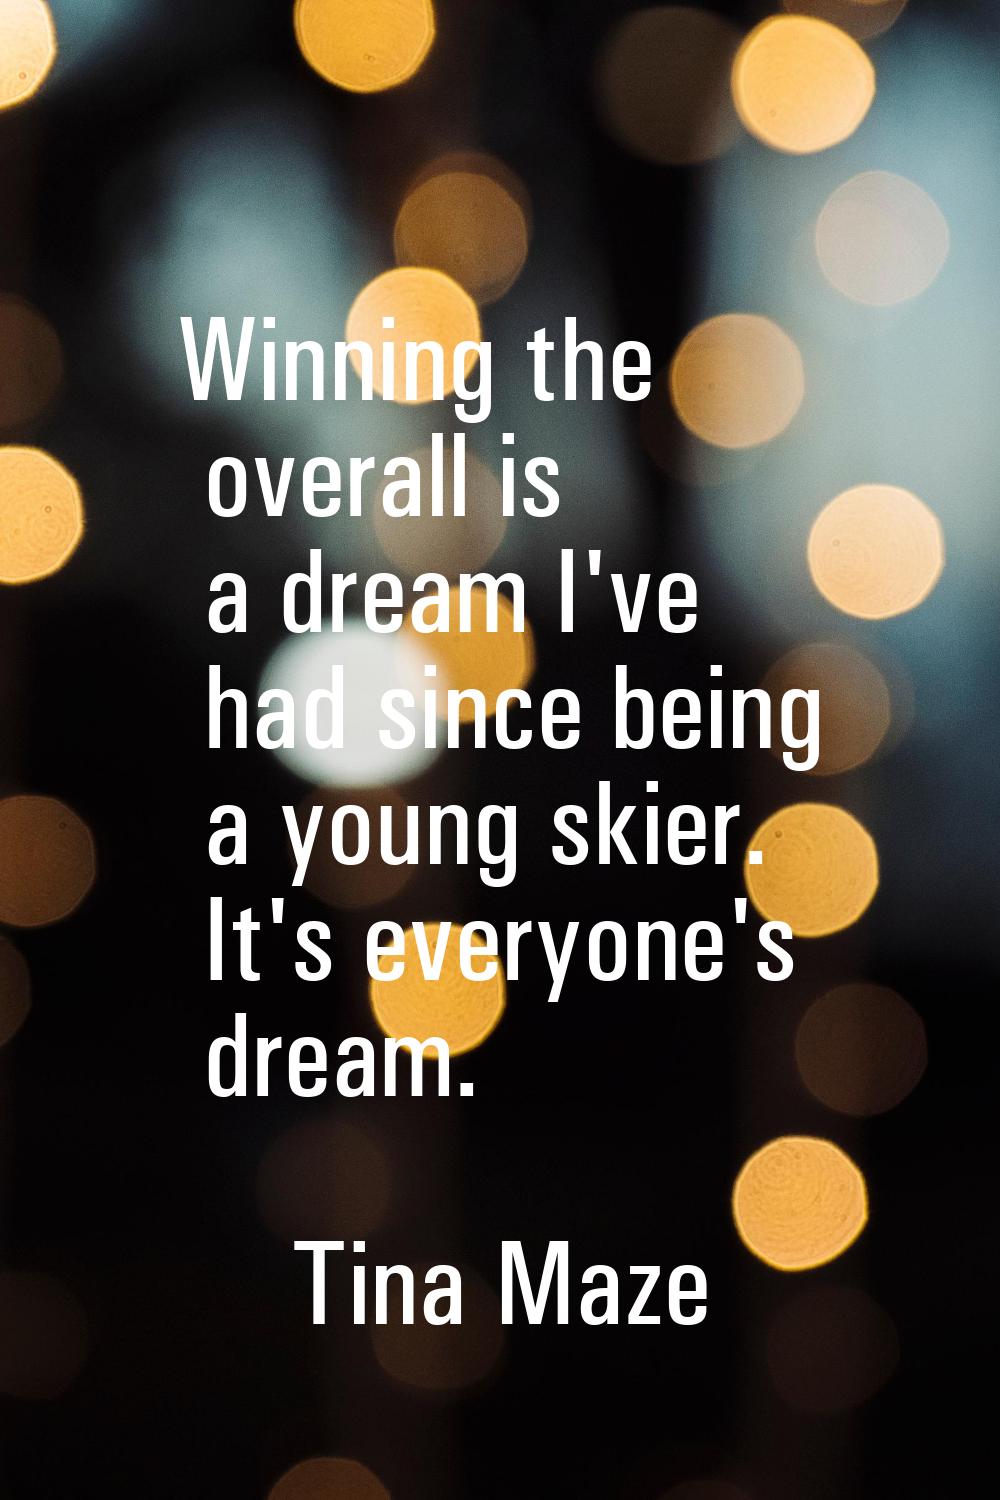 Winning the overall is a dream I've had since being a young skier. It's everyone's dream.